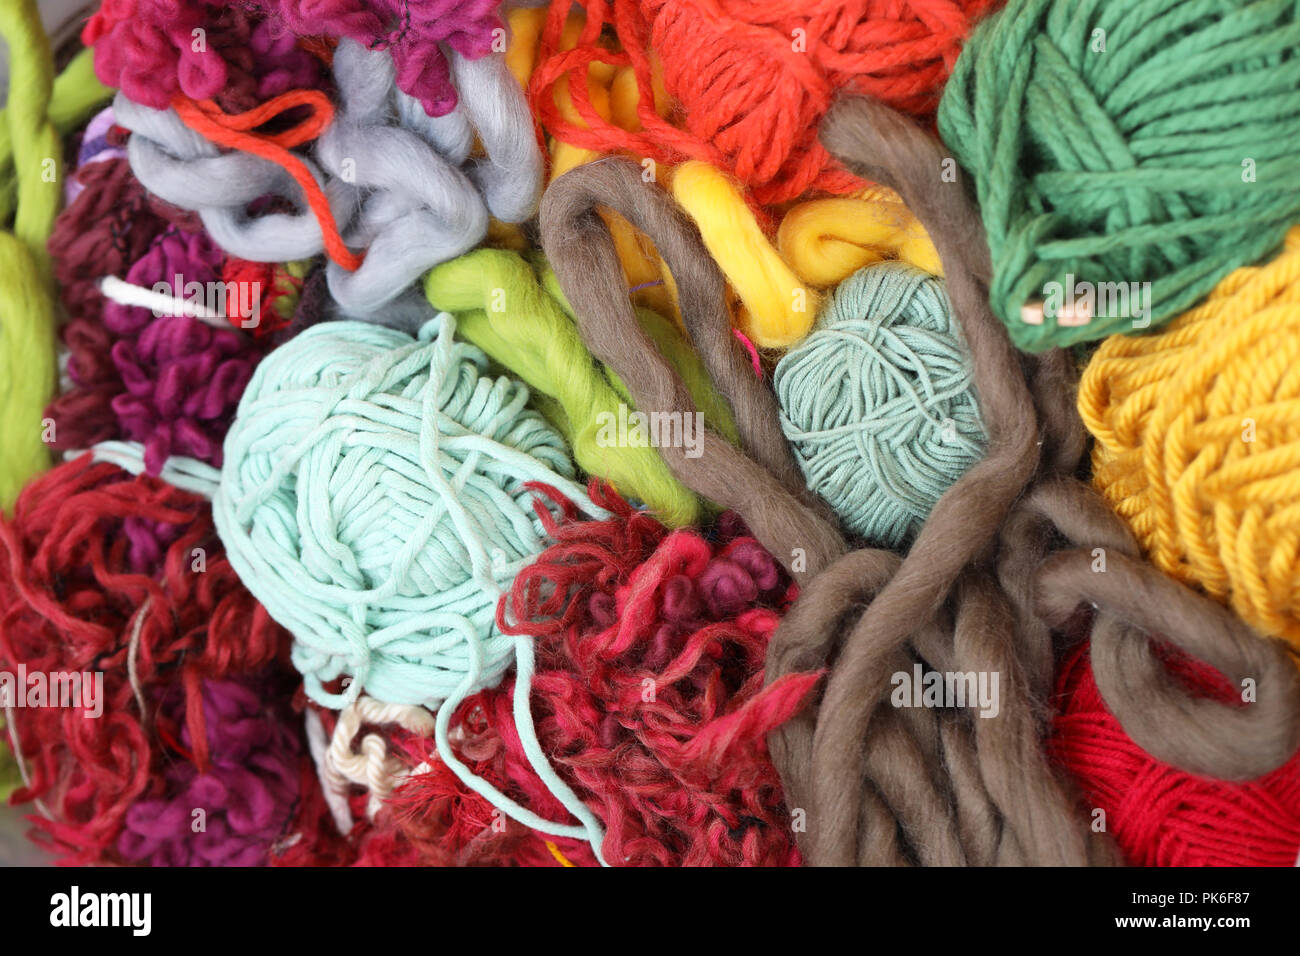 mass of woven weaving material. large bundle of fluffy thick twine